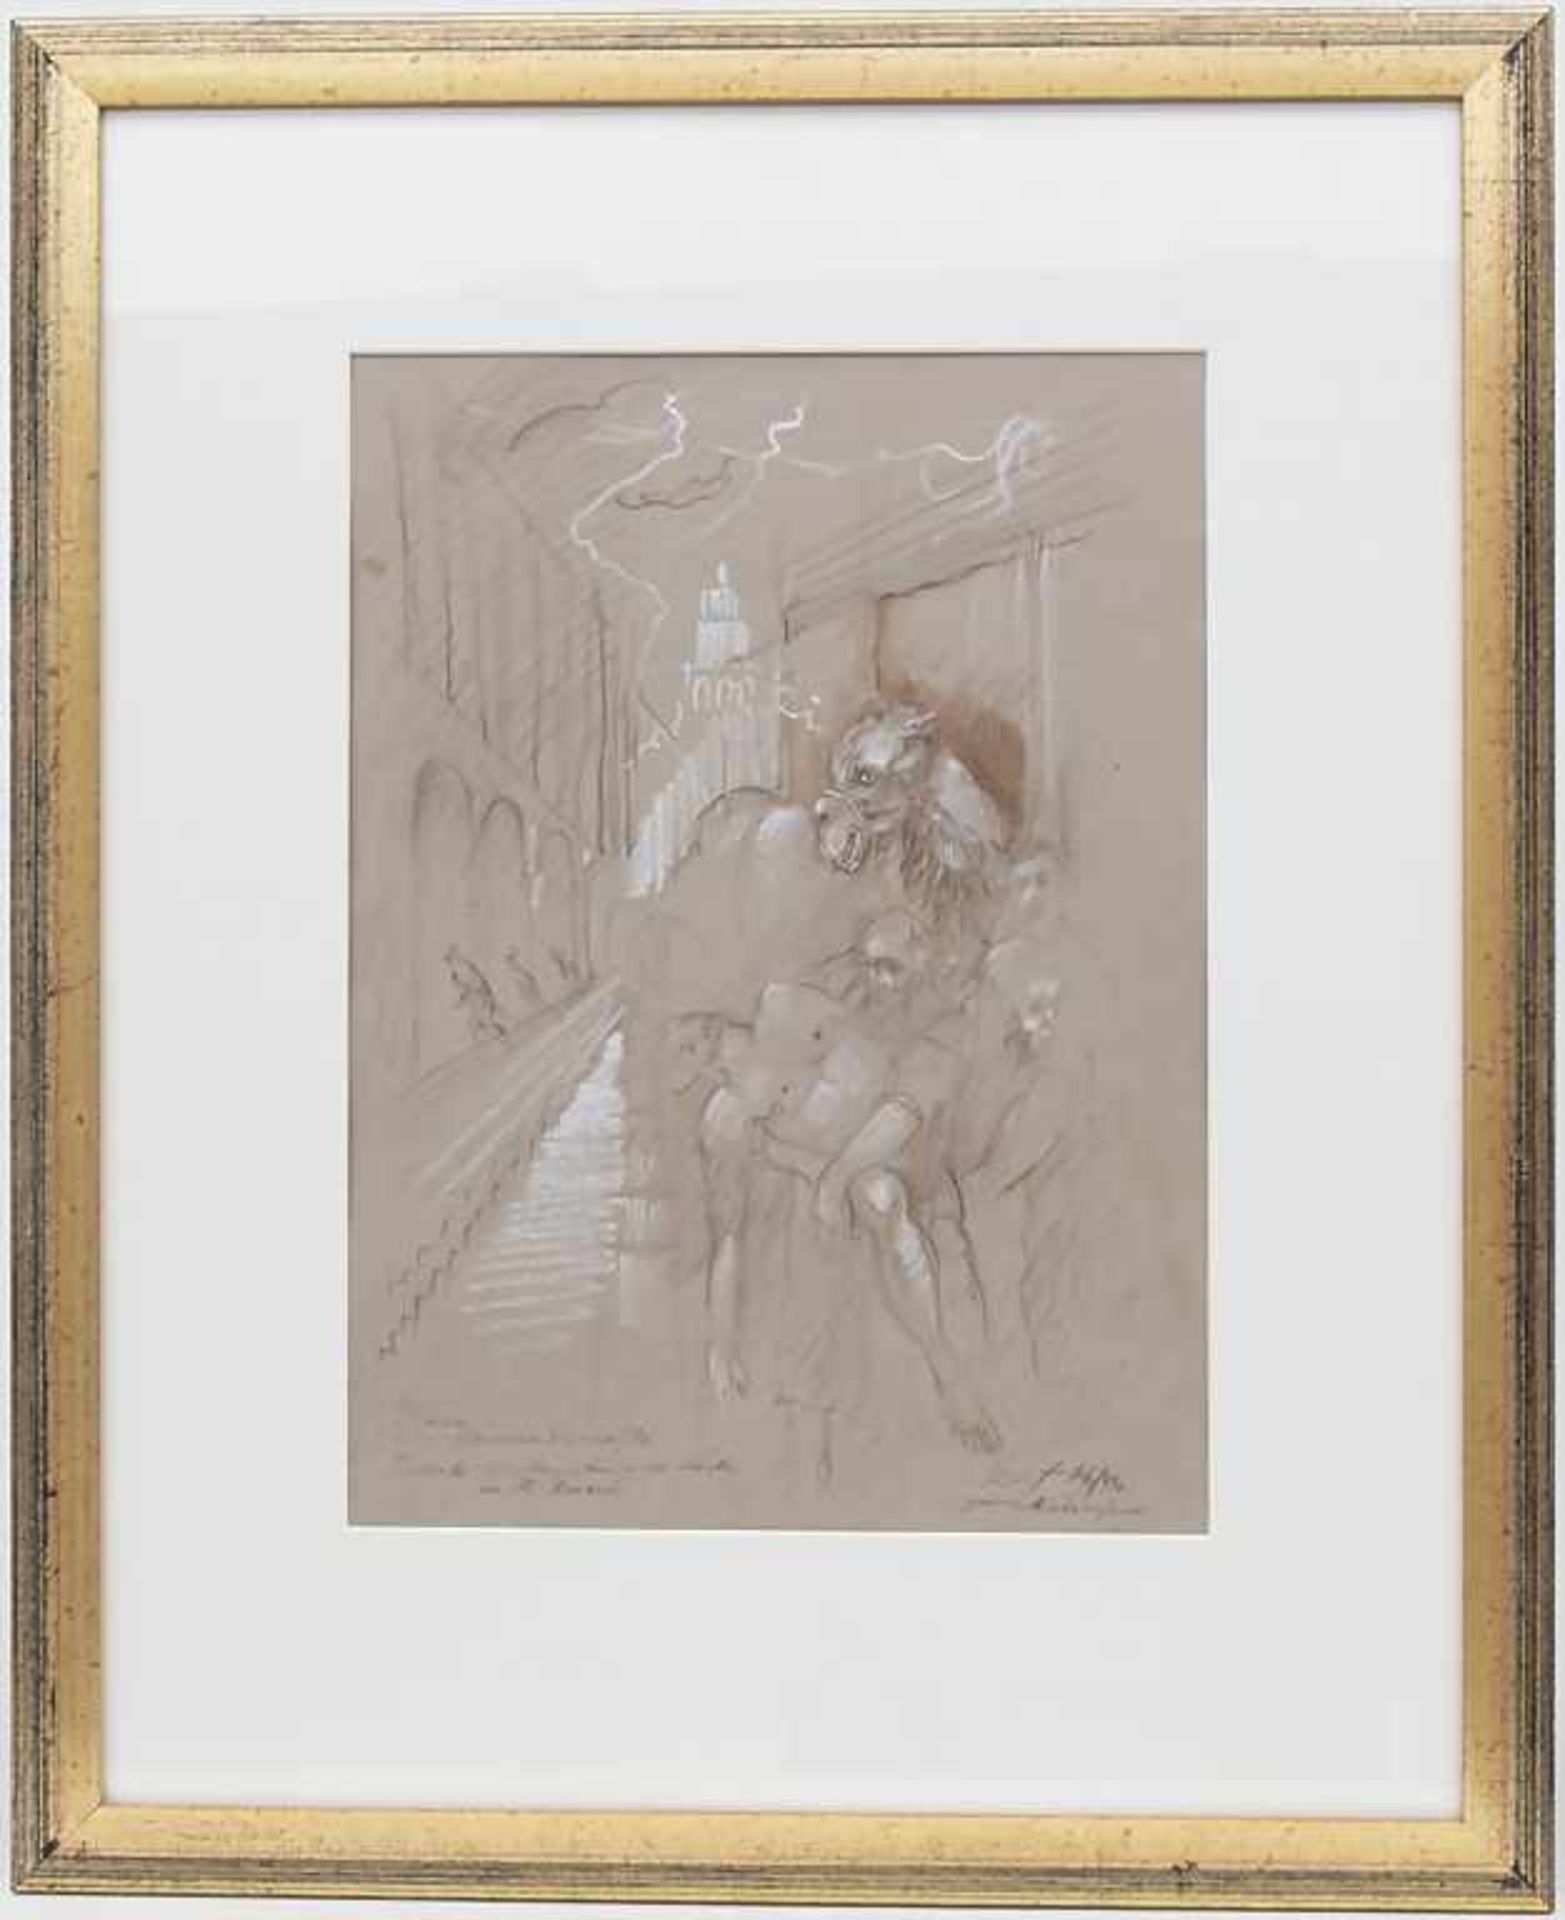 Werner Holz (1948-1991),Studie nach Tintorettos 'Hlg. Marcus' / A study after Tintoretto's 'Marcus' - Image 2 of 4